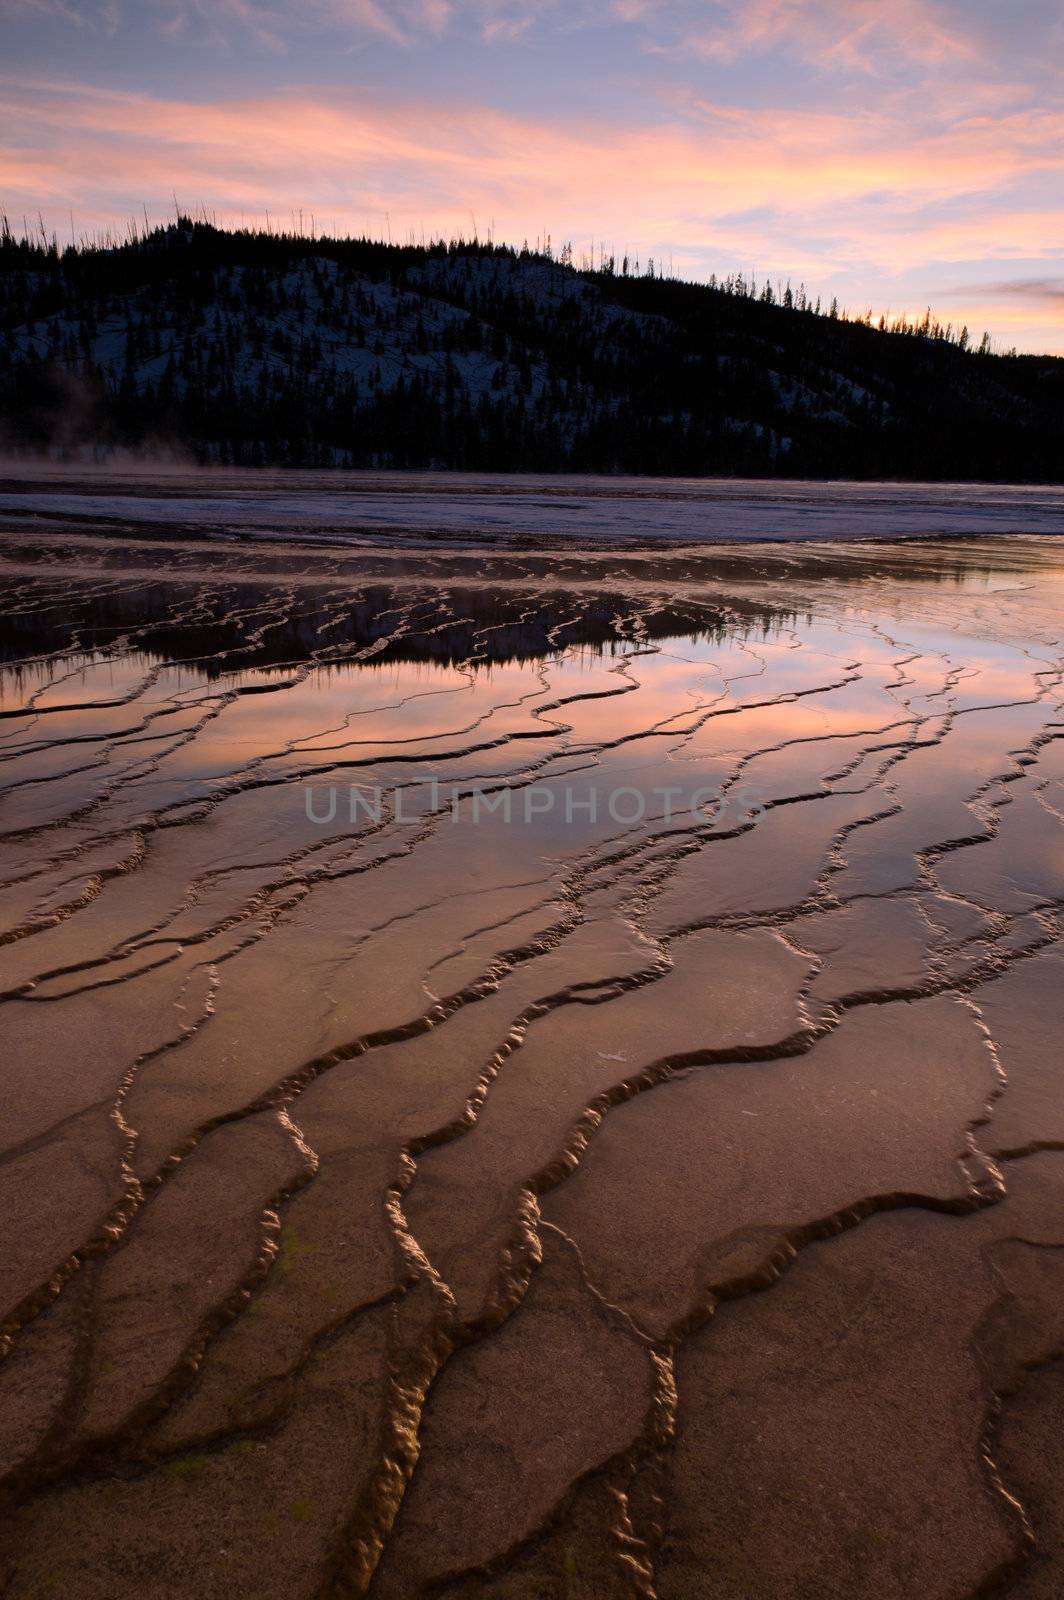 Geyserite patterns and a forested ridge at sunset, Grand Prismatic Spring, Yellowstone National Park, Wyoming, USA by CharlesBolin